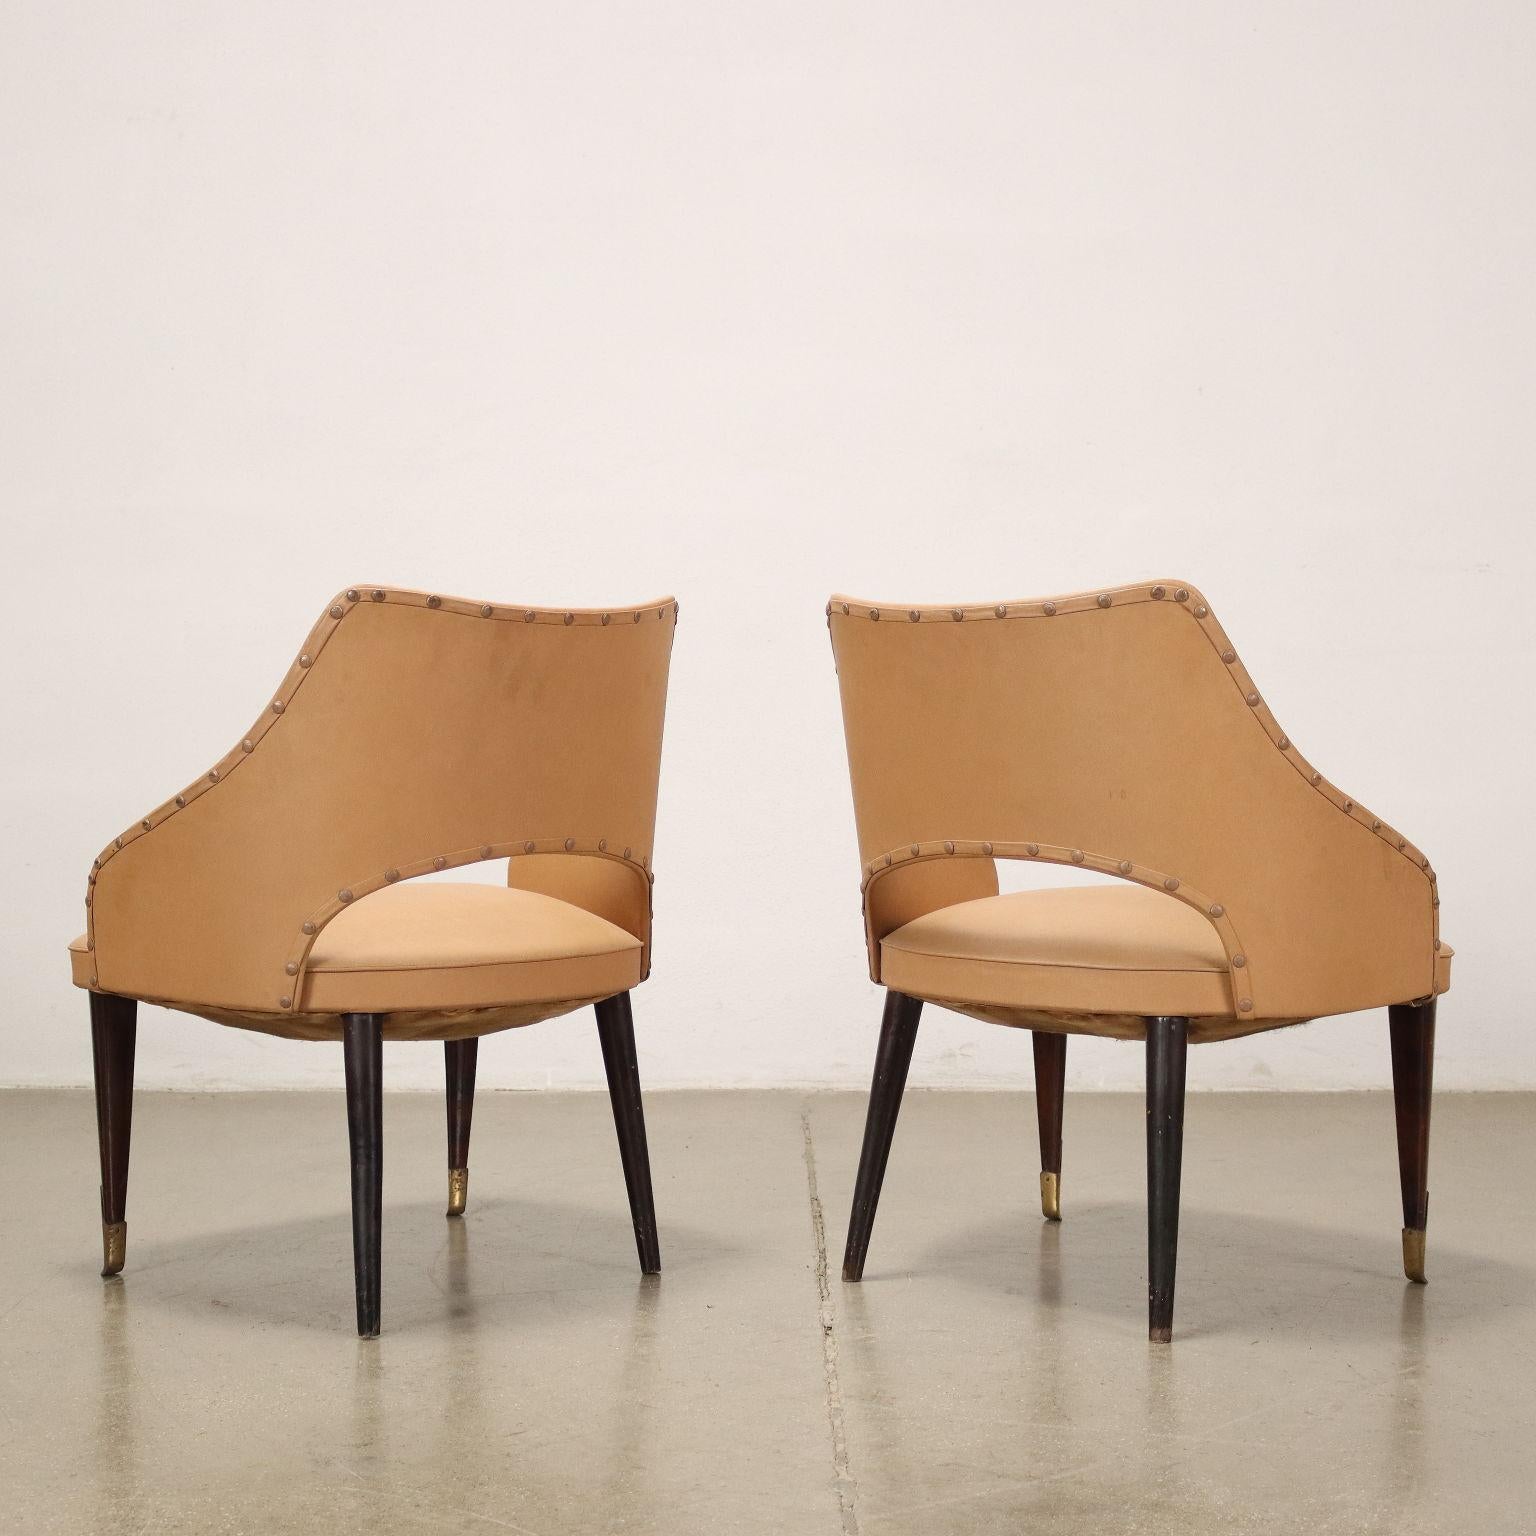 Pair of Armchairs Wood Italy, 1950s-1960s For Sale 2